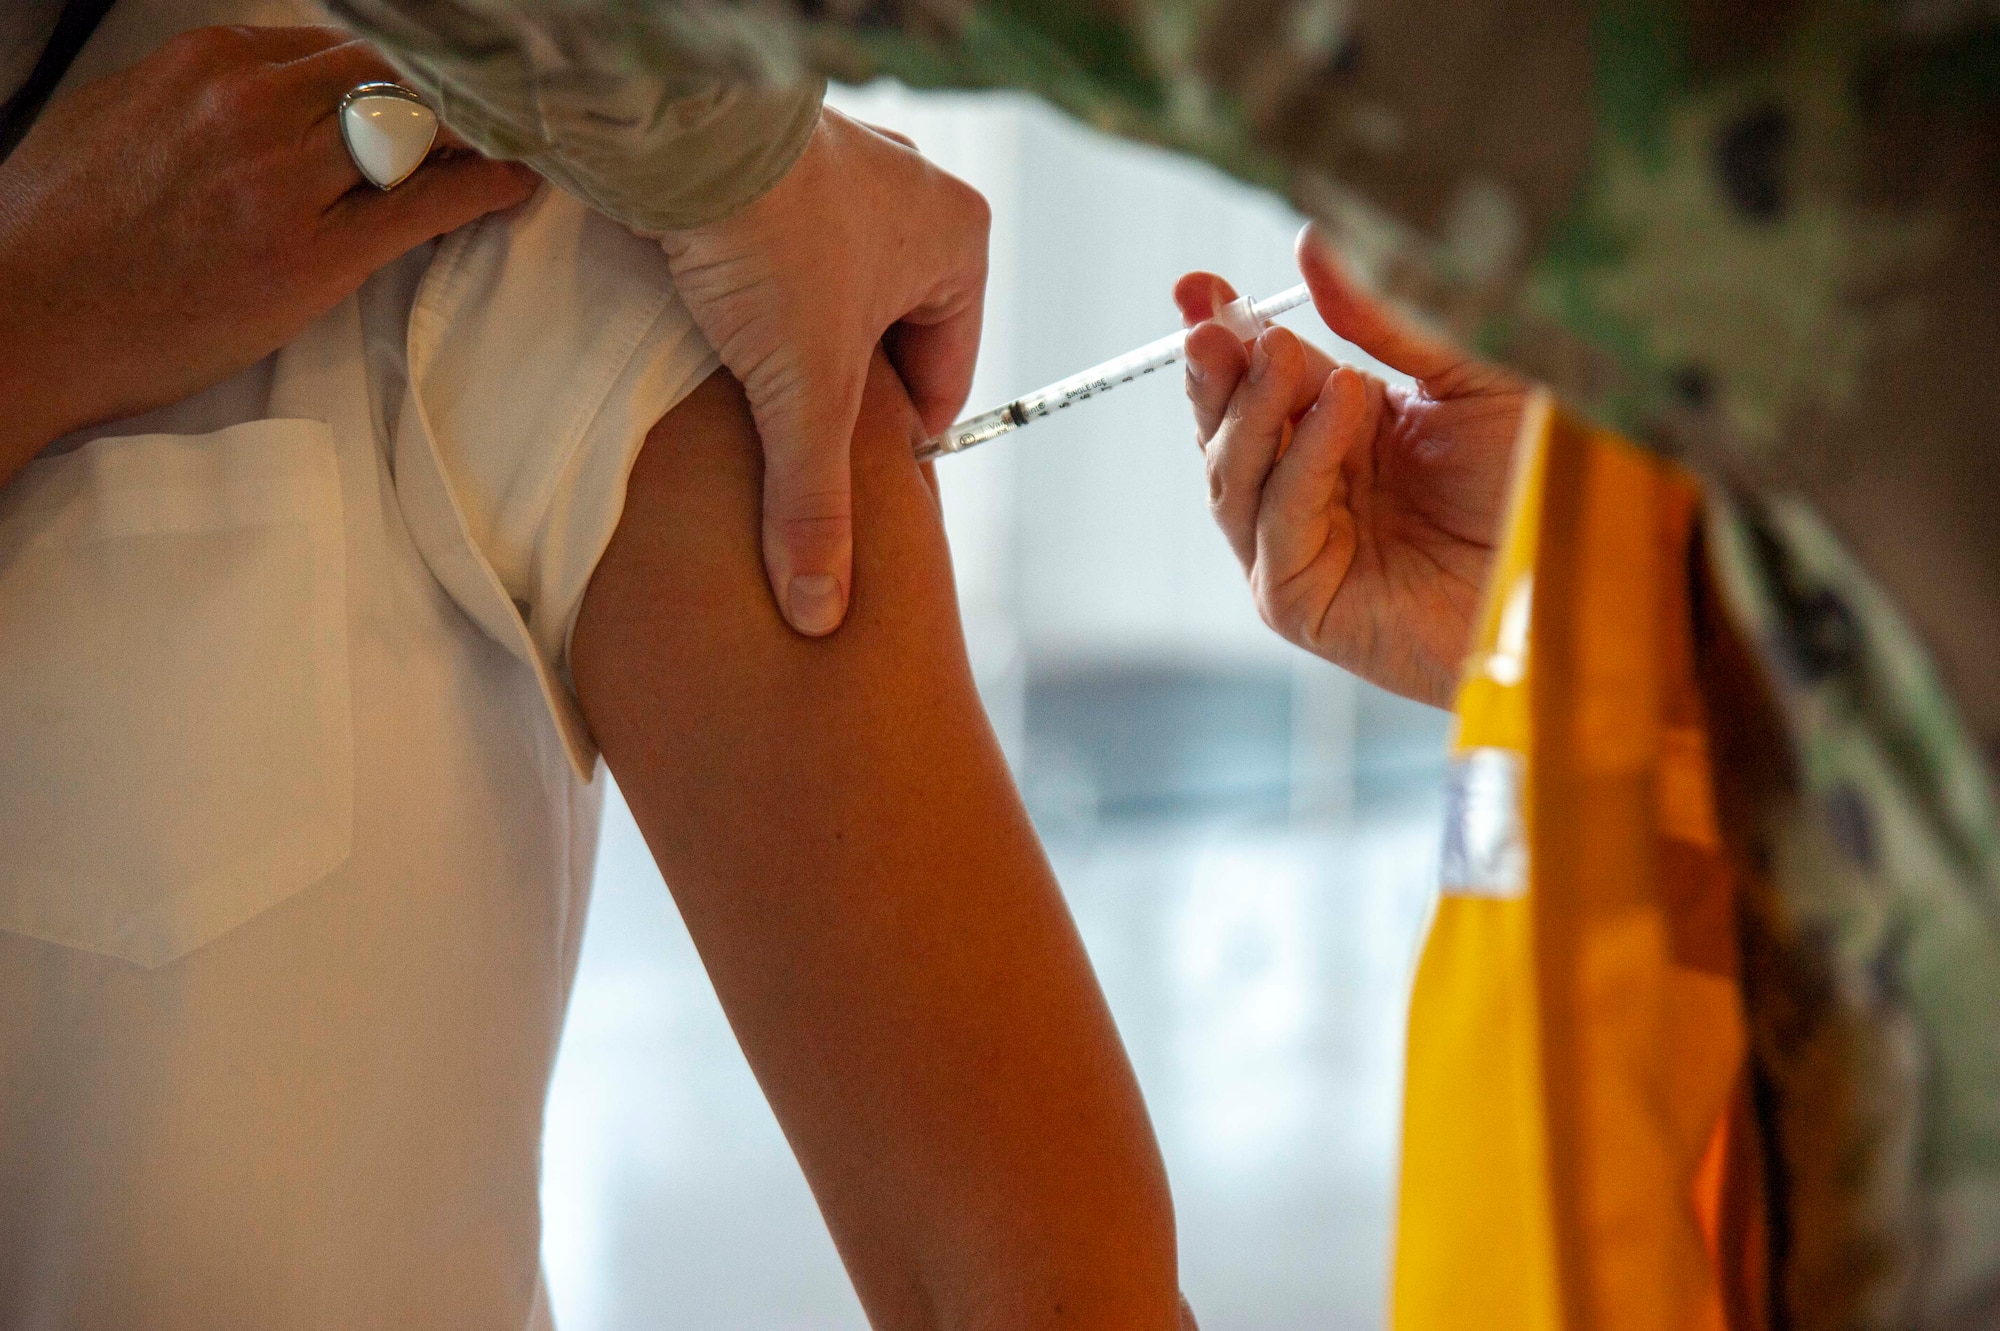 Iryiva Bazaria, a member of Team MacDill, receives a vaccination at a COVID-19 vaccination distribution site, located on MacDill Air Force Base, Fla., March 12, 2021. Each COVID-19 vaccine is prepared on-site and must be used within 6 hours of preparation and removal from storage. (U.S. Air Force photo by Airman 1st Class David D. McLoney)